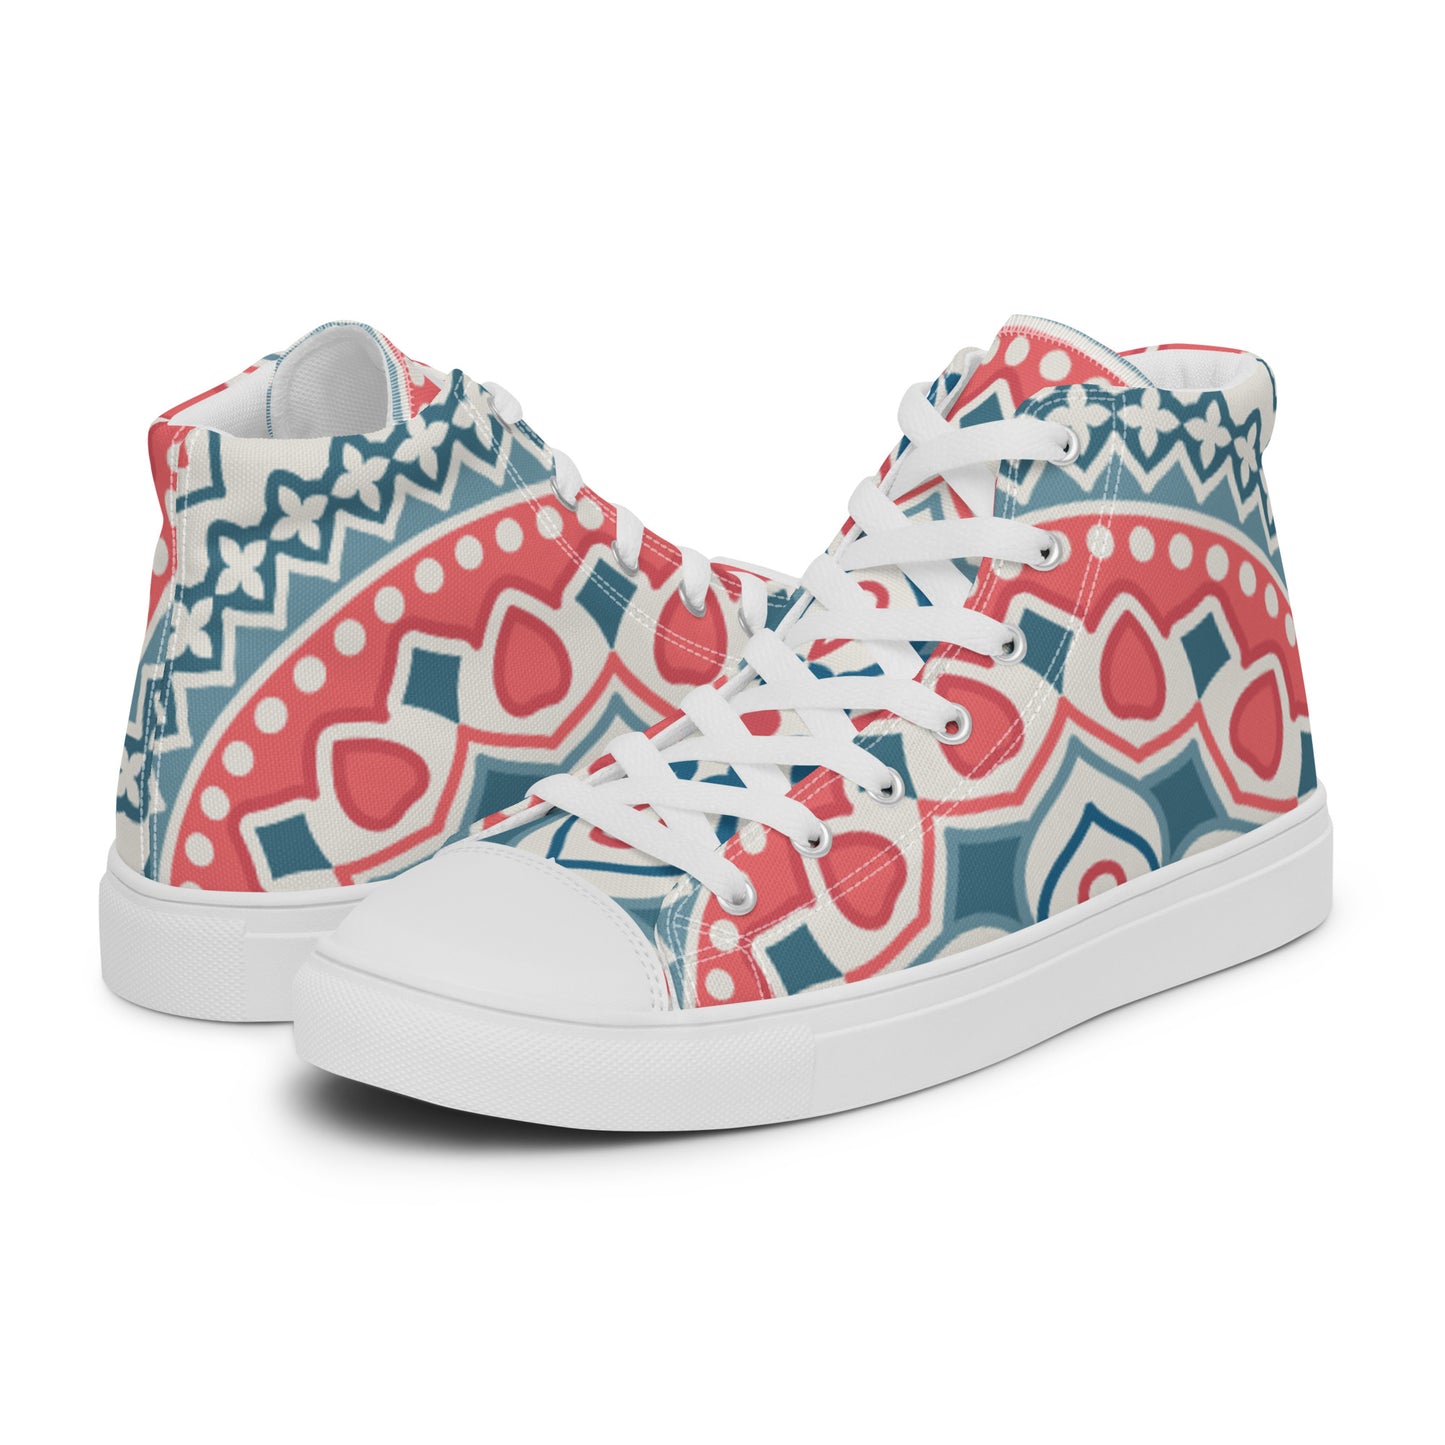 Women’s Pattern high top canvas shoes